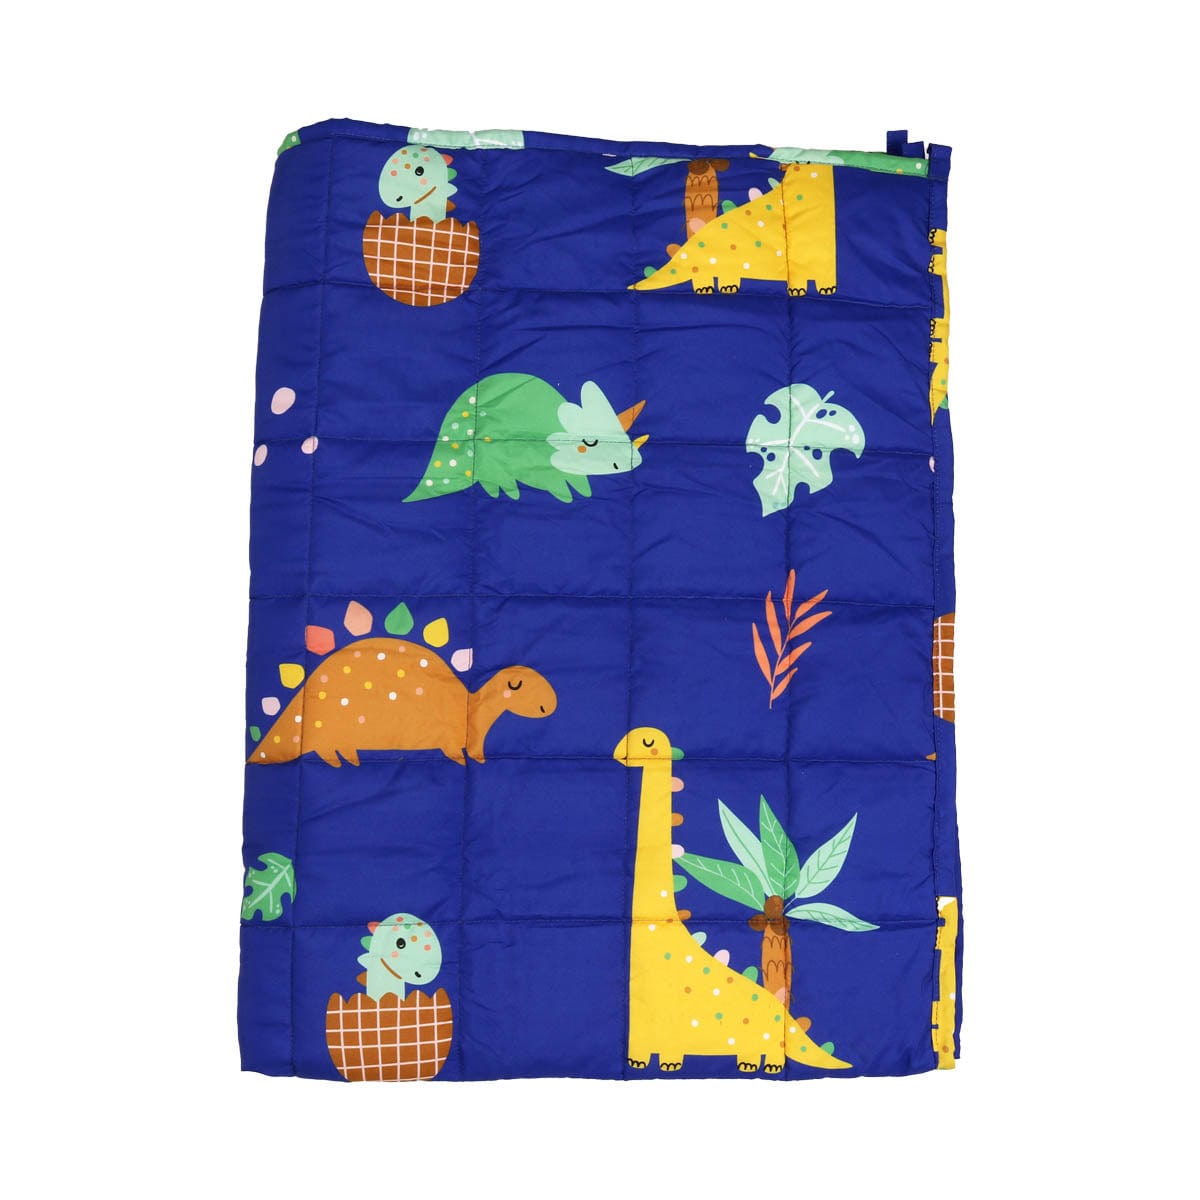 Sensory Calming Weighted Blanket for Kids dino land